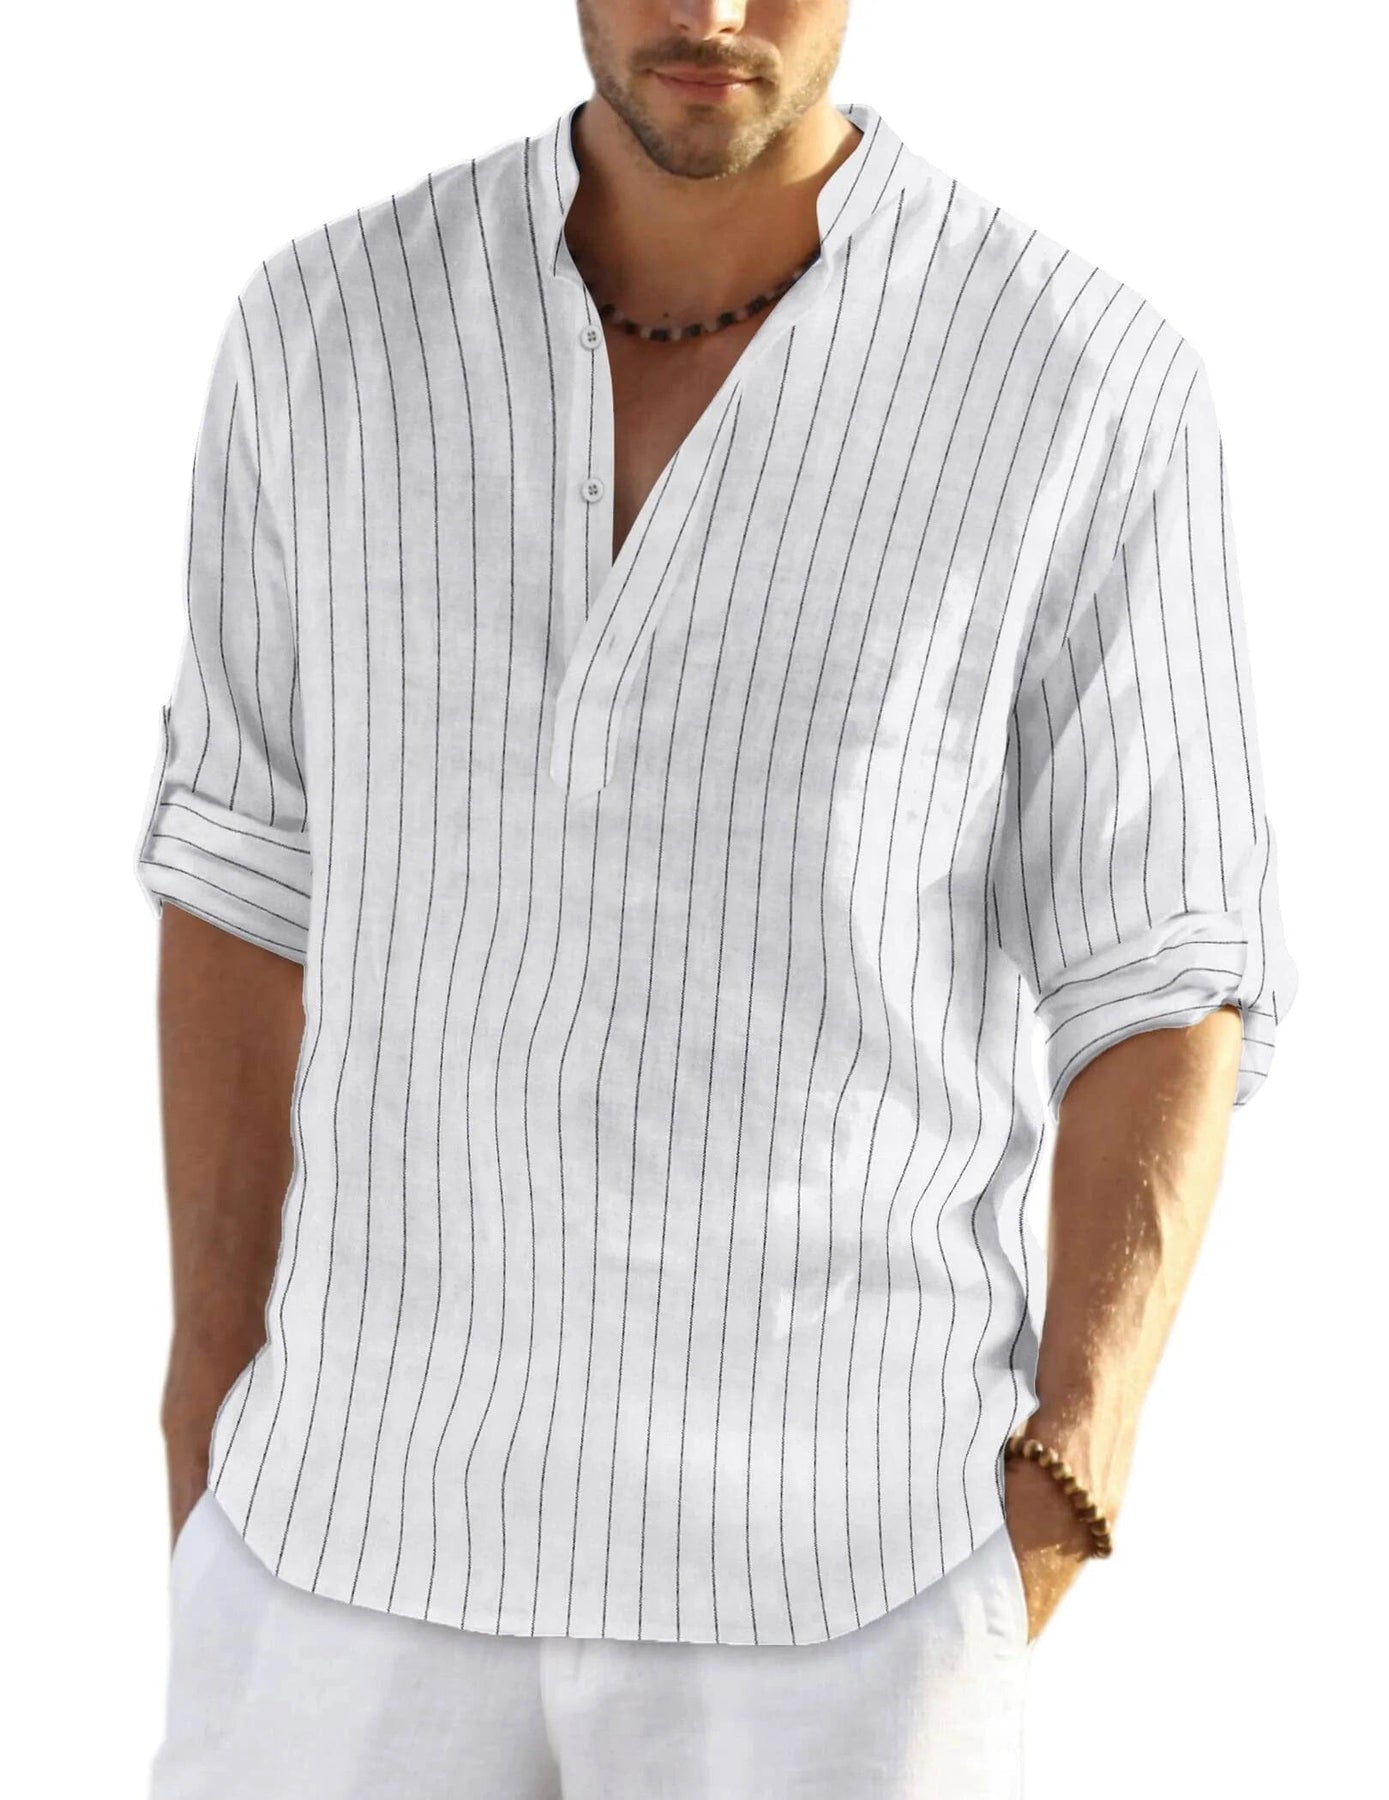 Casual Beach Shirts - Lightweight & Stylish | Perfect for Any Occasion ...